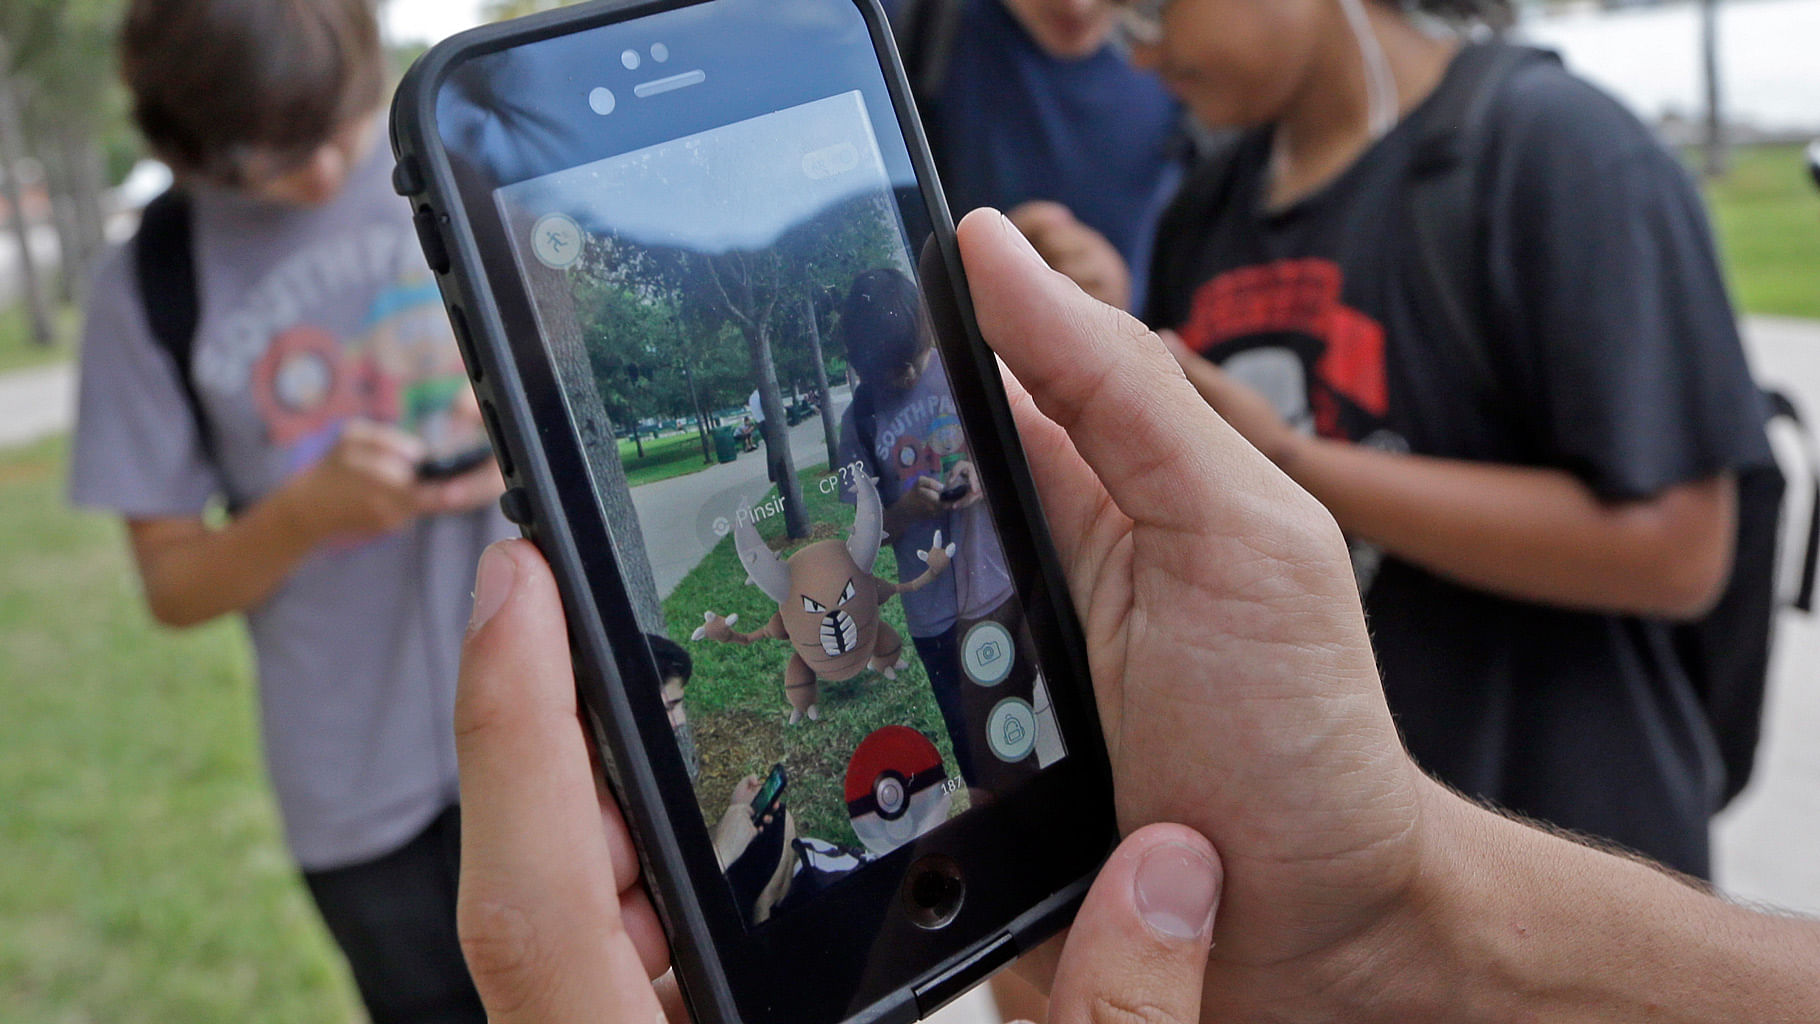 

The ‘Pokemon Go’ craze has sent legions of players hiking around cities and battling with “pocket monsters” on their smartphones. (Photo: AP)